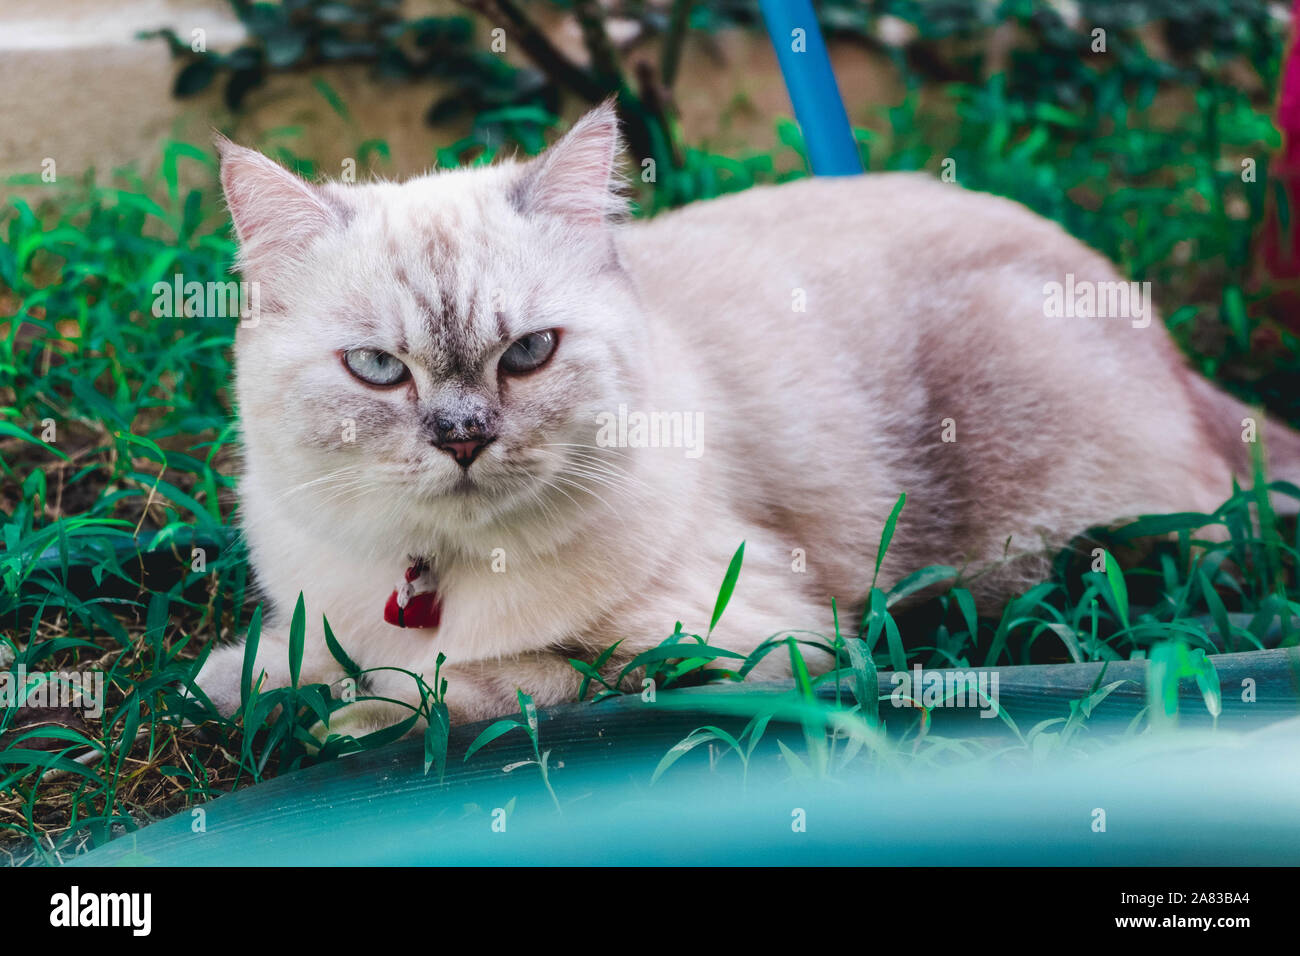 Hybrid Cats in Thailand Stock Photo - Alamy